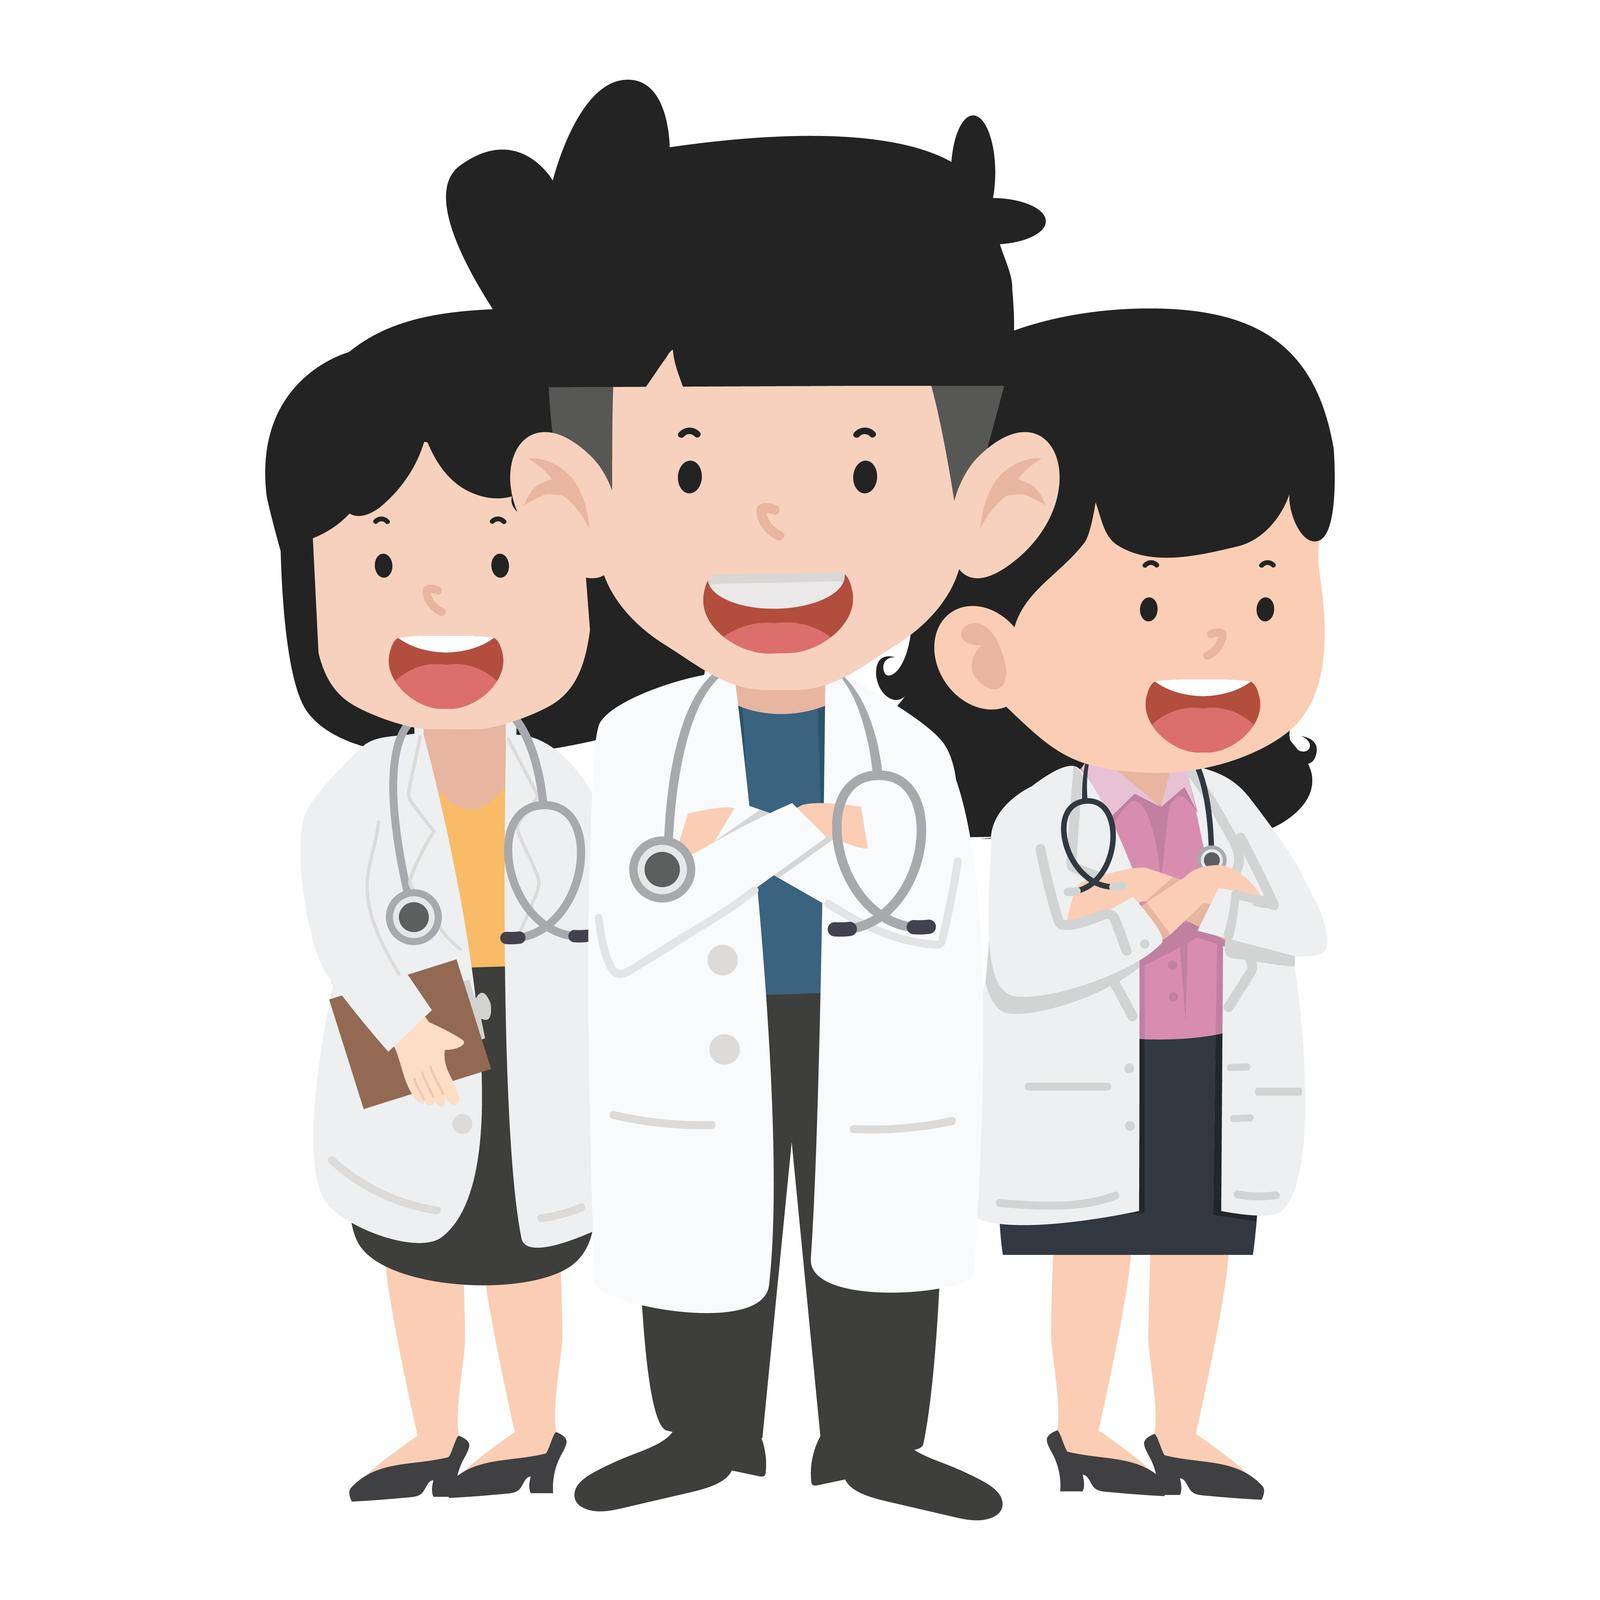 Set of doctor cartoon characters medical staff team concept in hospital